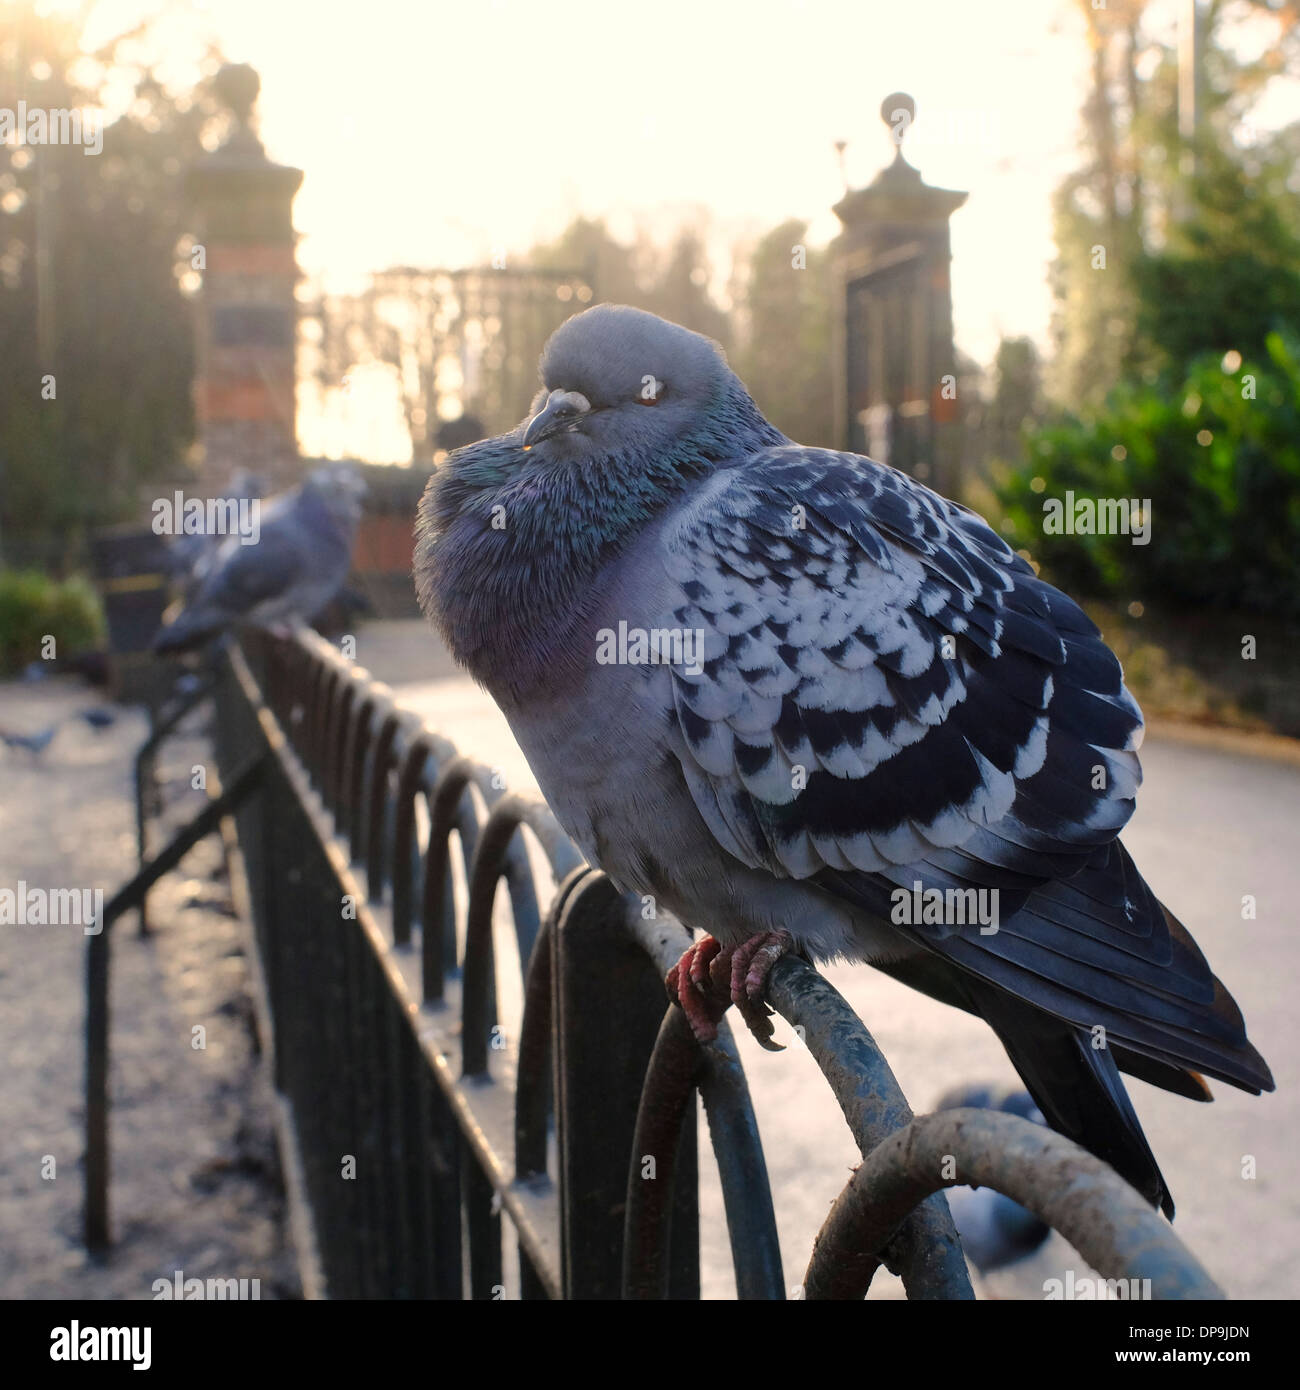 pigeon on fence looking unwell with swollen throat and runny nose possibly with bird flu Stock Photo